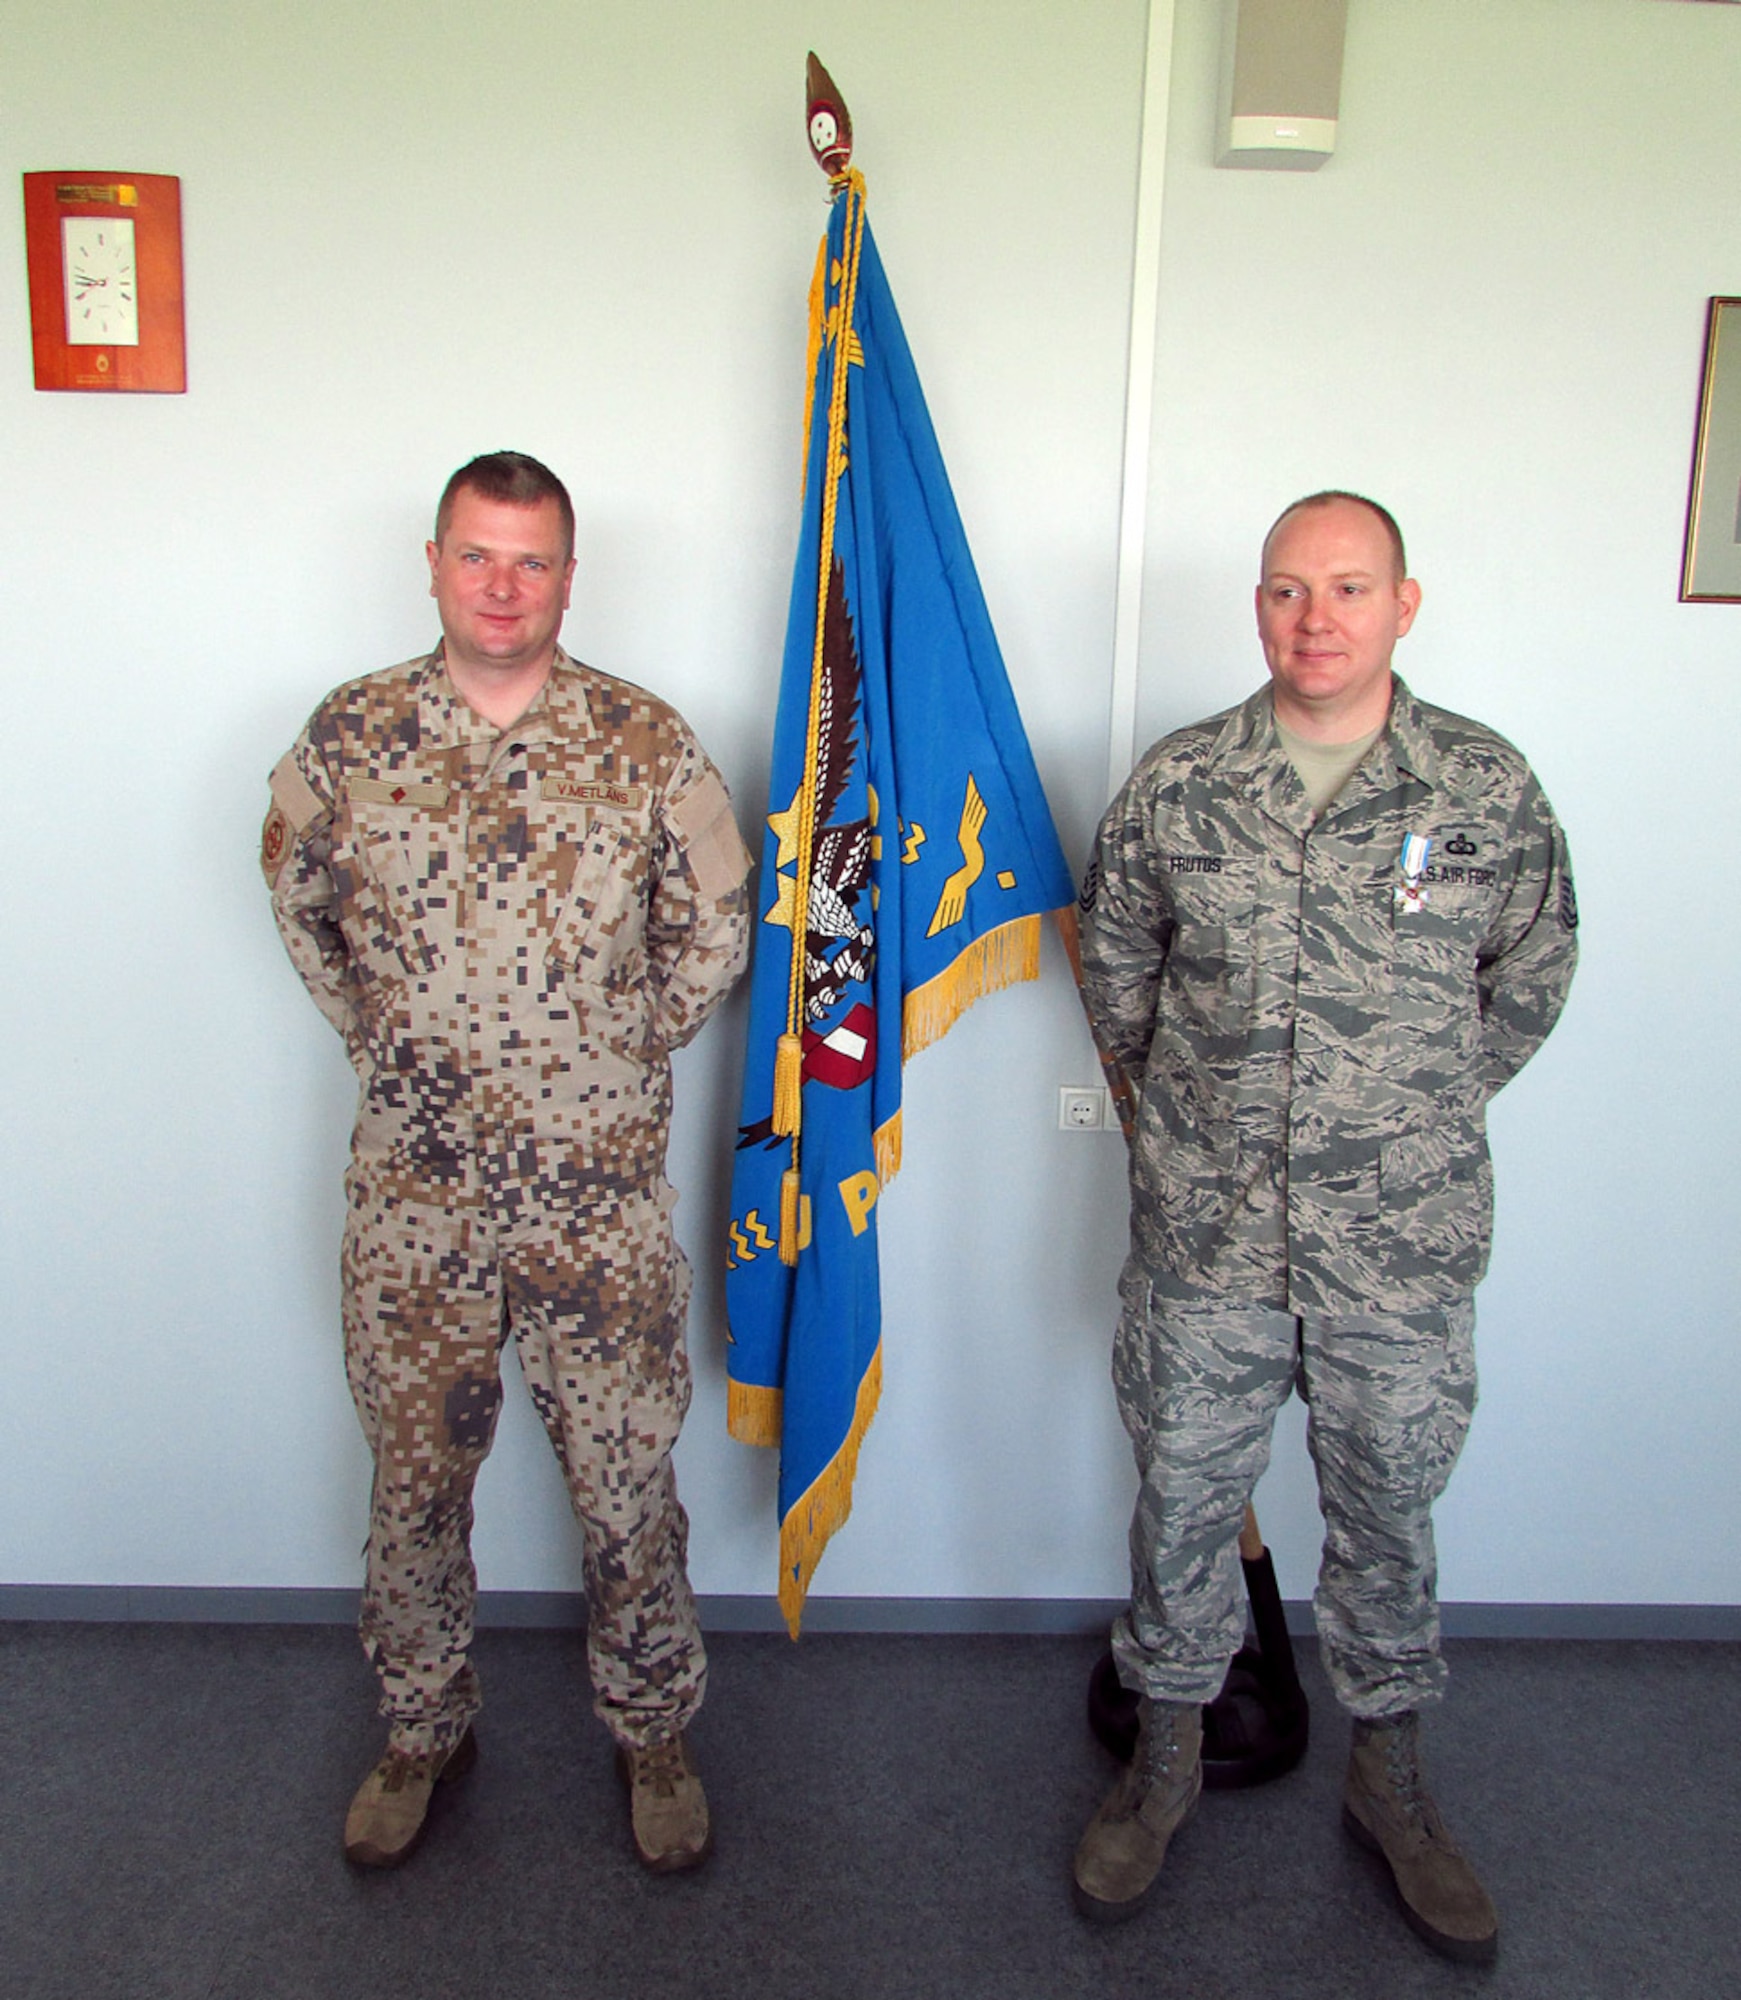 U.S. Air Force Master Sgt. Thomas Frutos stands with Latvian Maj. Vilnis Metlans following Frutos’ award of the Latvian National Armed Forces Air Force Commander Award of Honor, Grade 3, in Lielvarde, Latvia, April 30, 2015. Frutos is assigned to the 217th Air Operations Group, Michigan Air National Guard, based at Battle Creek, Michigan, and is the first U.S. Armed Forces member to receive the Latvian award. He was recognized for his expertise in airspace management, which resulted in a letter of agreement between the Latvian Civil Aviation Authority and the Latvian military creating military training airspace. (Photo by Lt. Col. Timothy Brock)